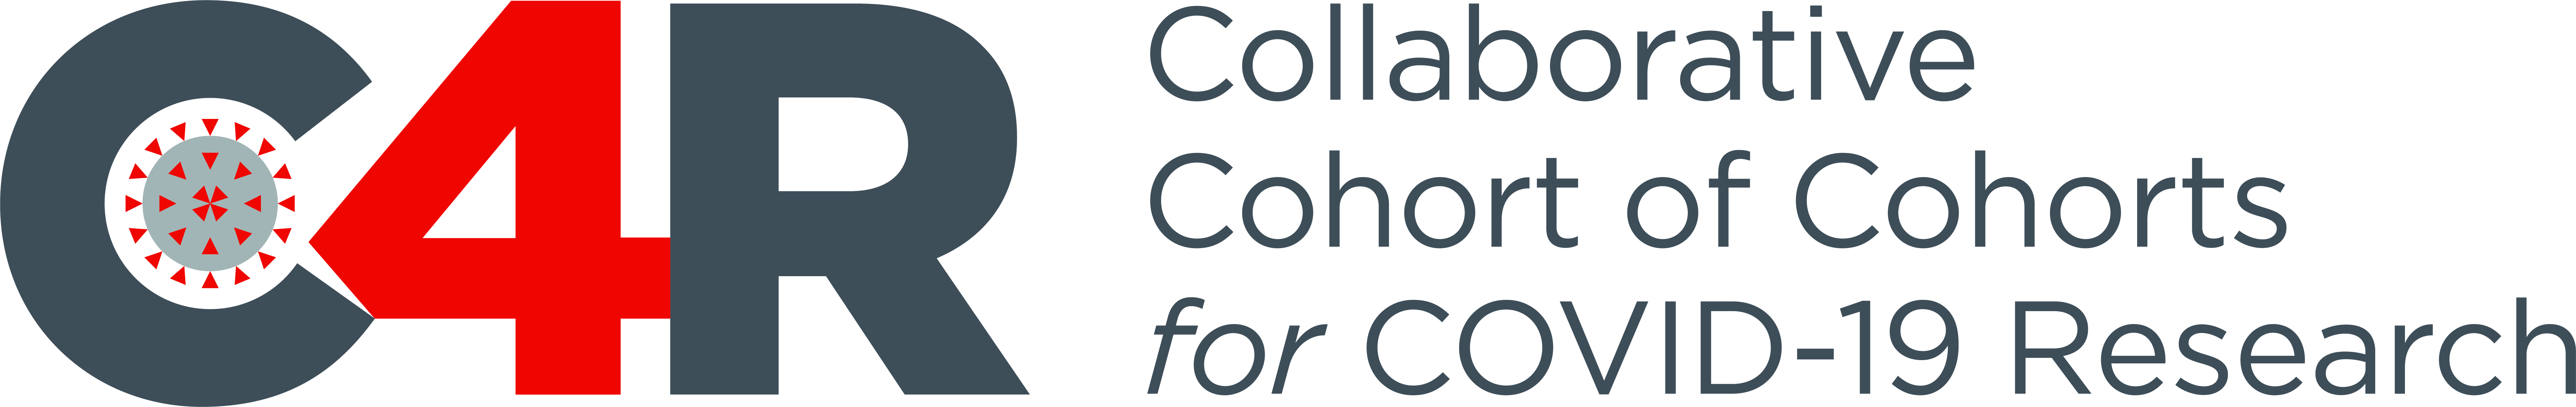 Collaborative Cohort of Cohorts for COVID-19 Research logo